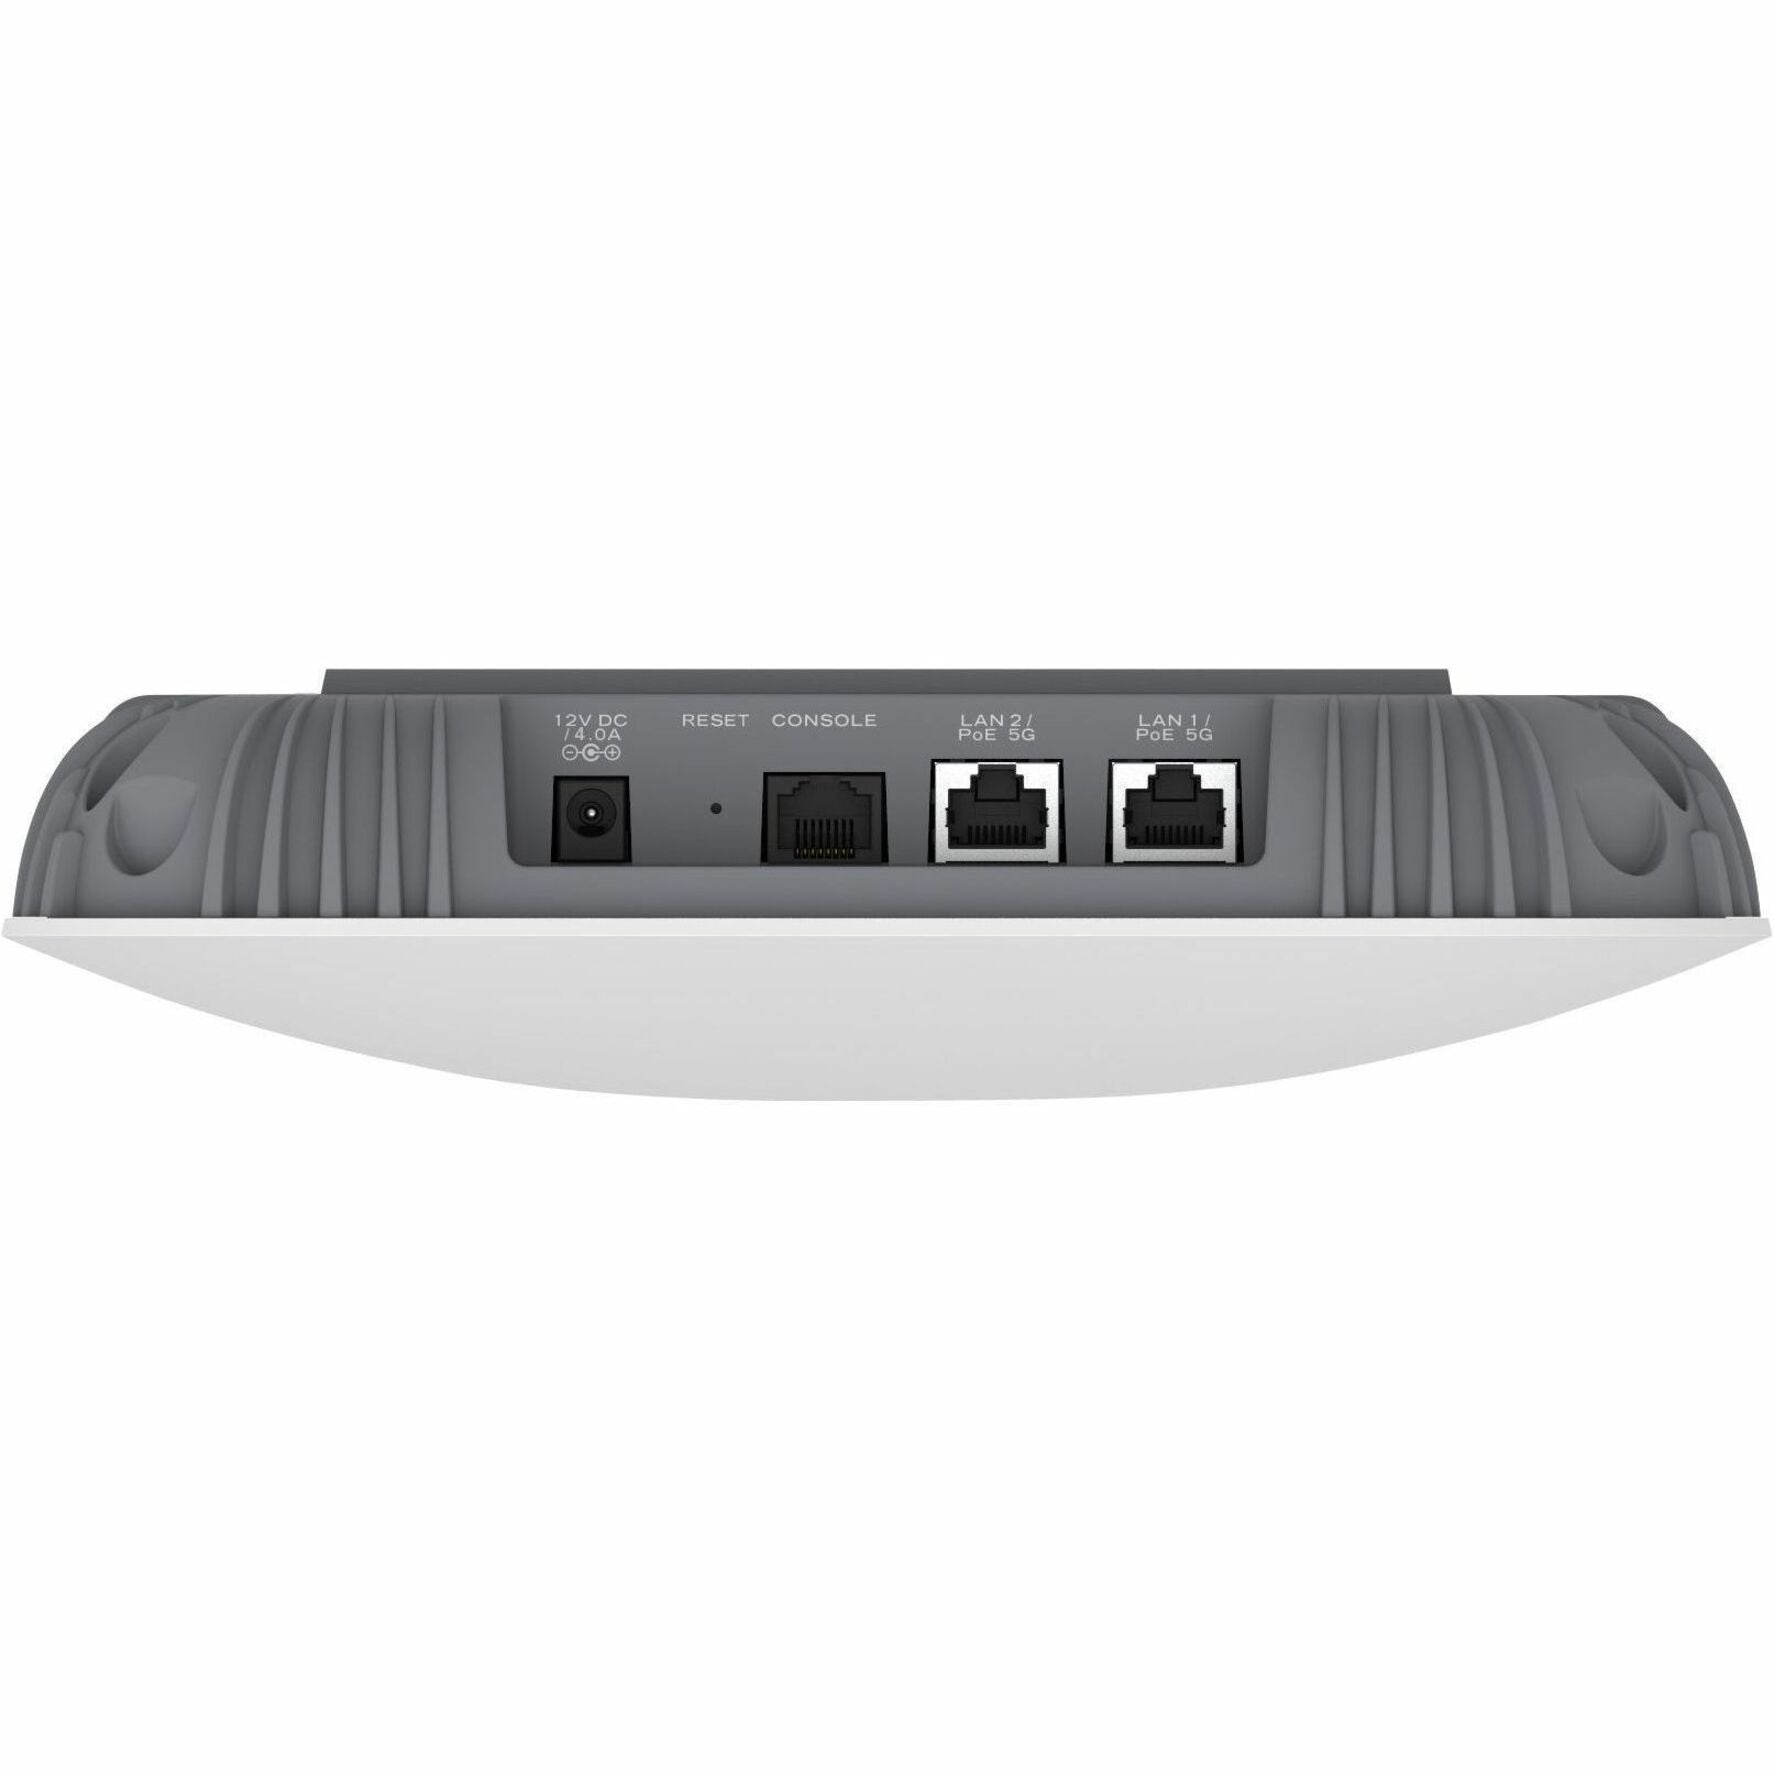 Fortinet FAP-431G-A FortiAP 431G Wireless Access Point Tri Band 8.16 Gbit/s